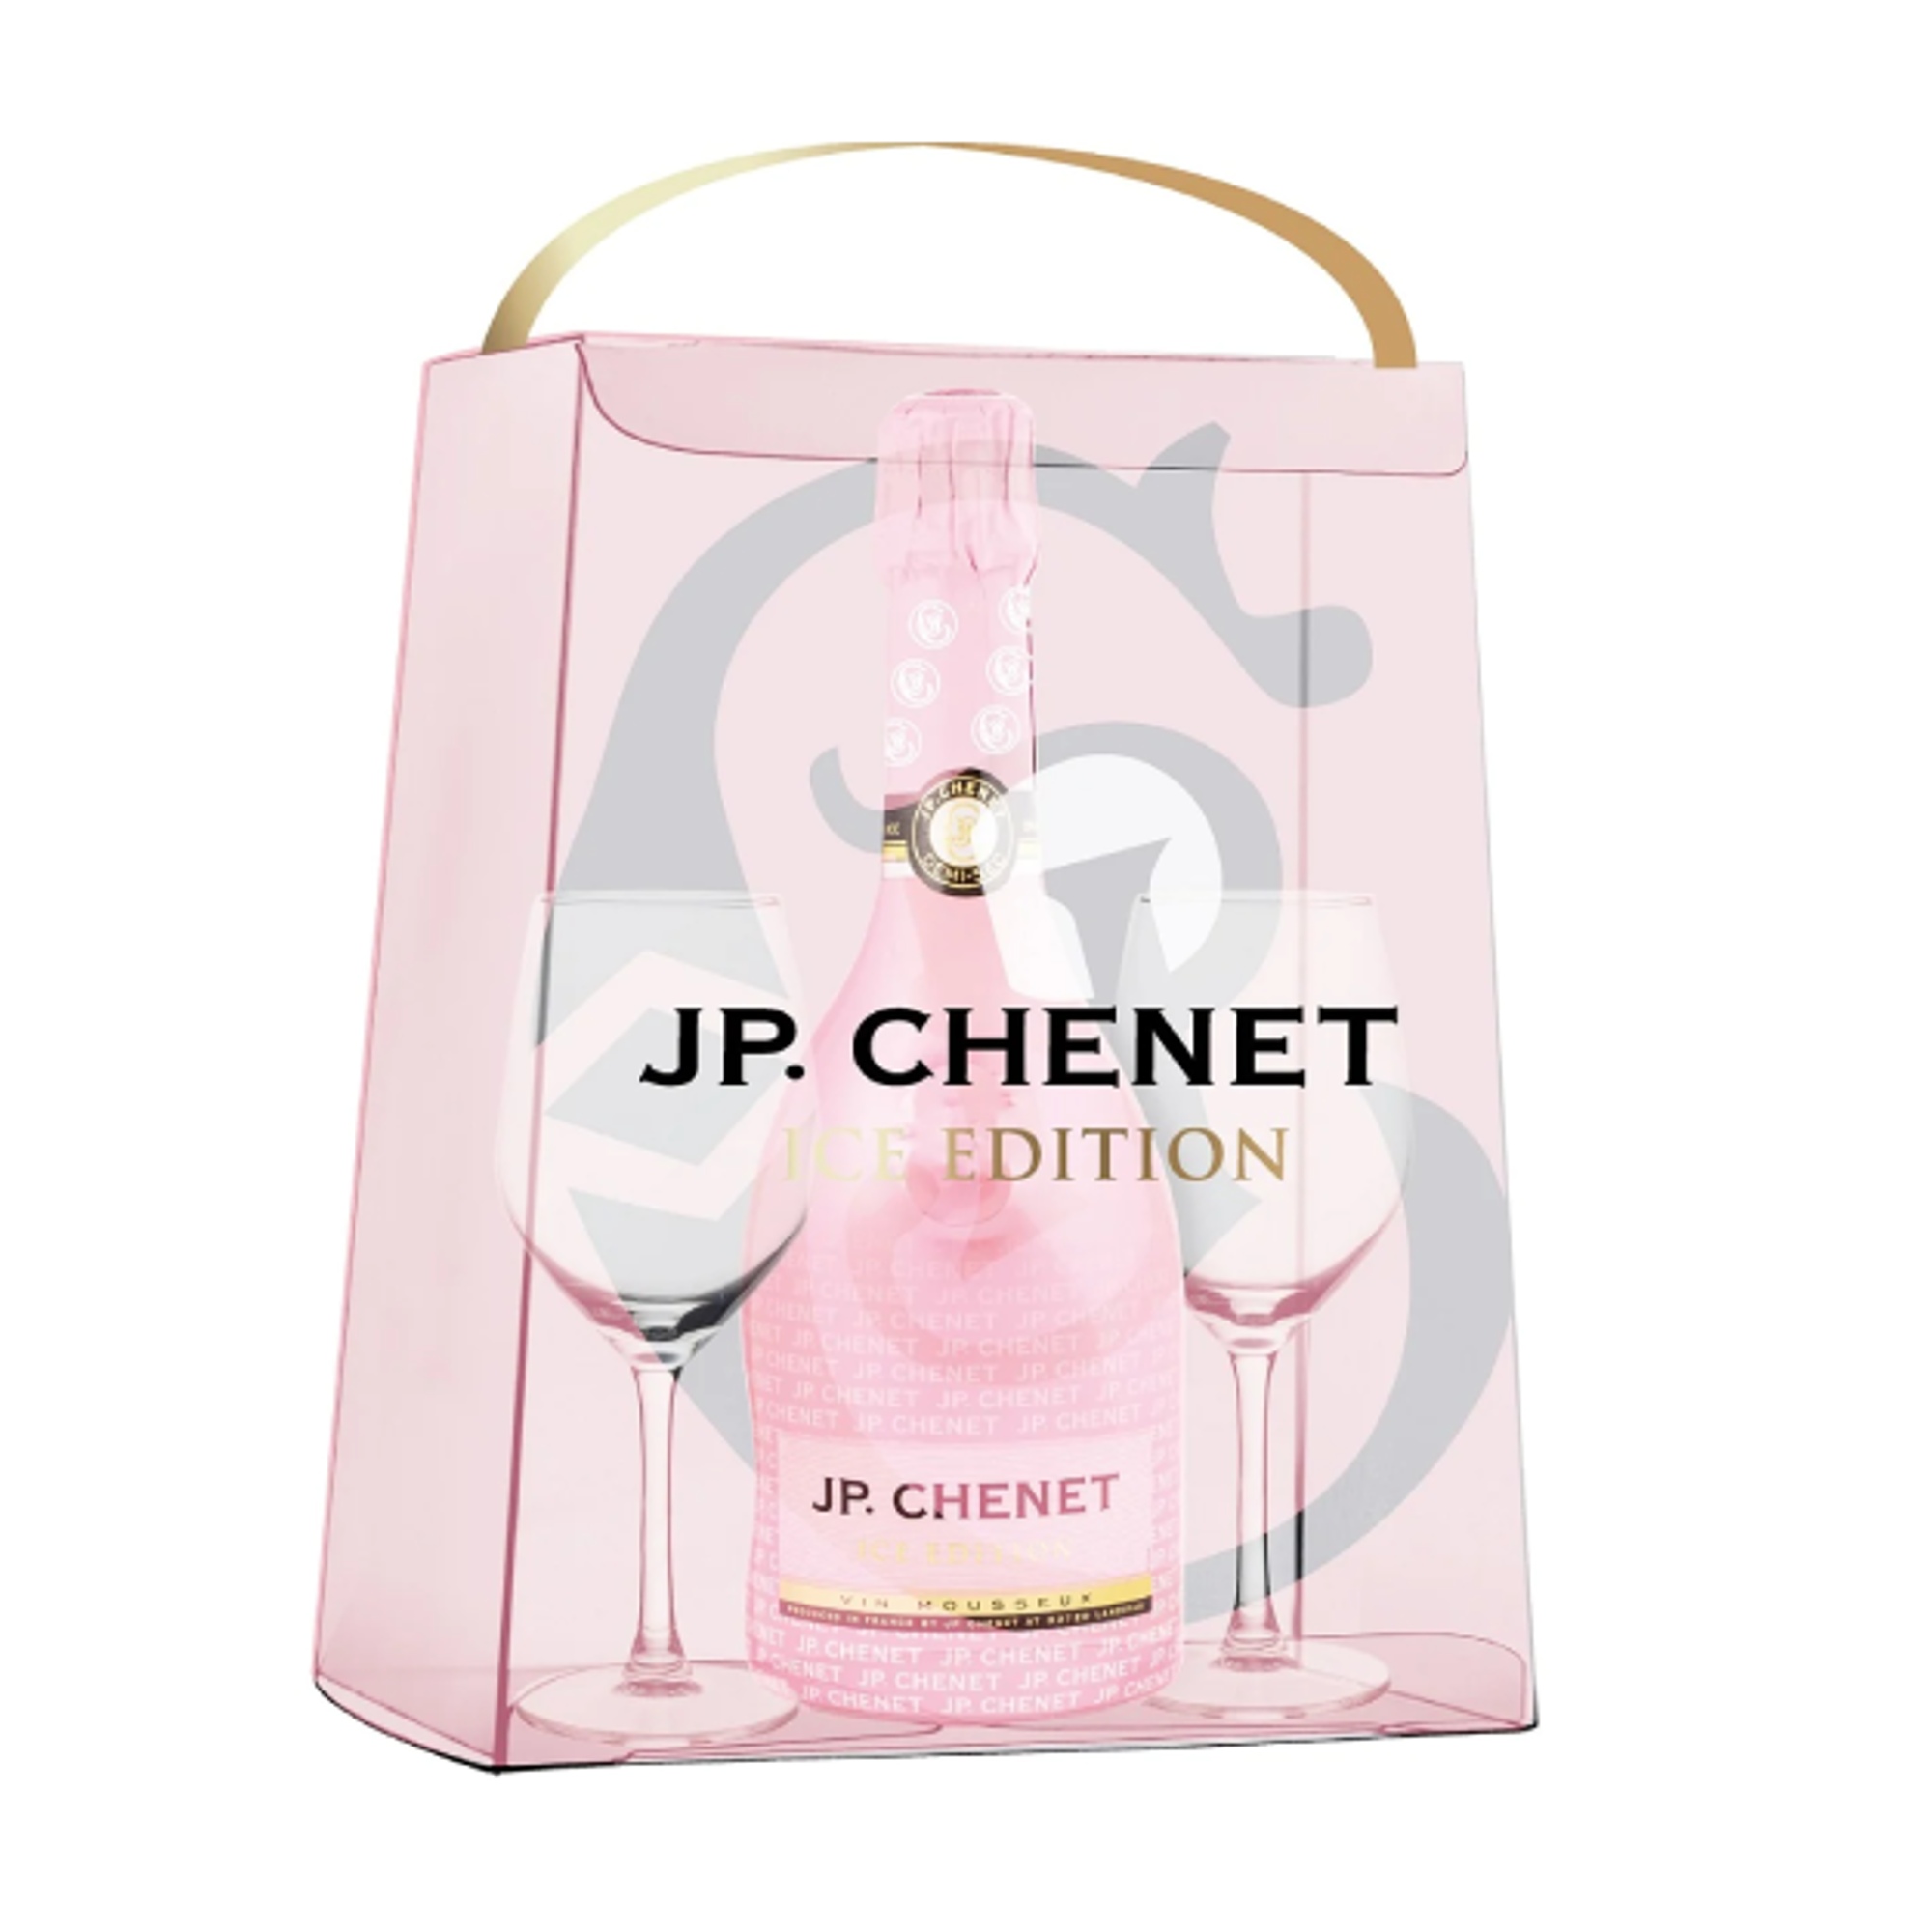 Mynd JP. Chenet Gift Pack Ice Edition Rose